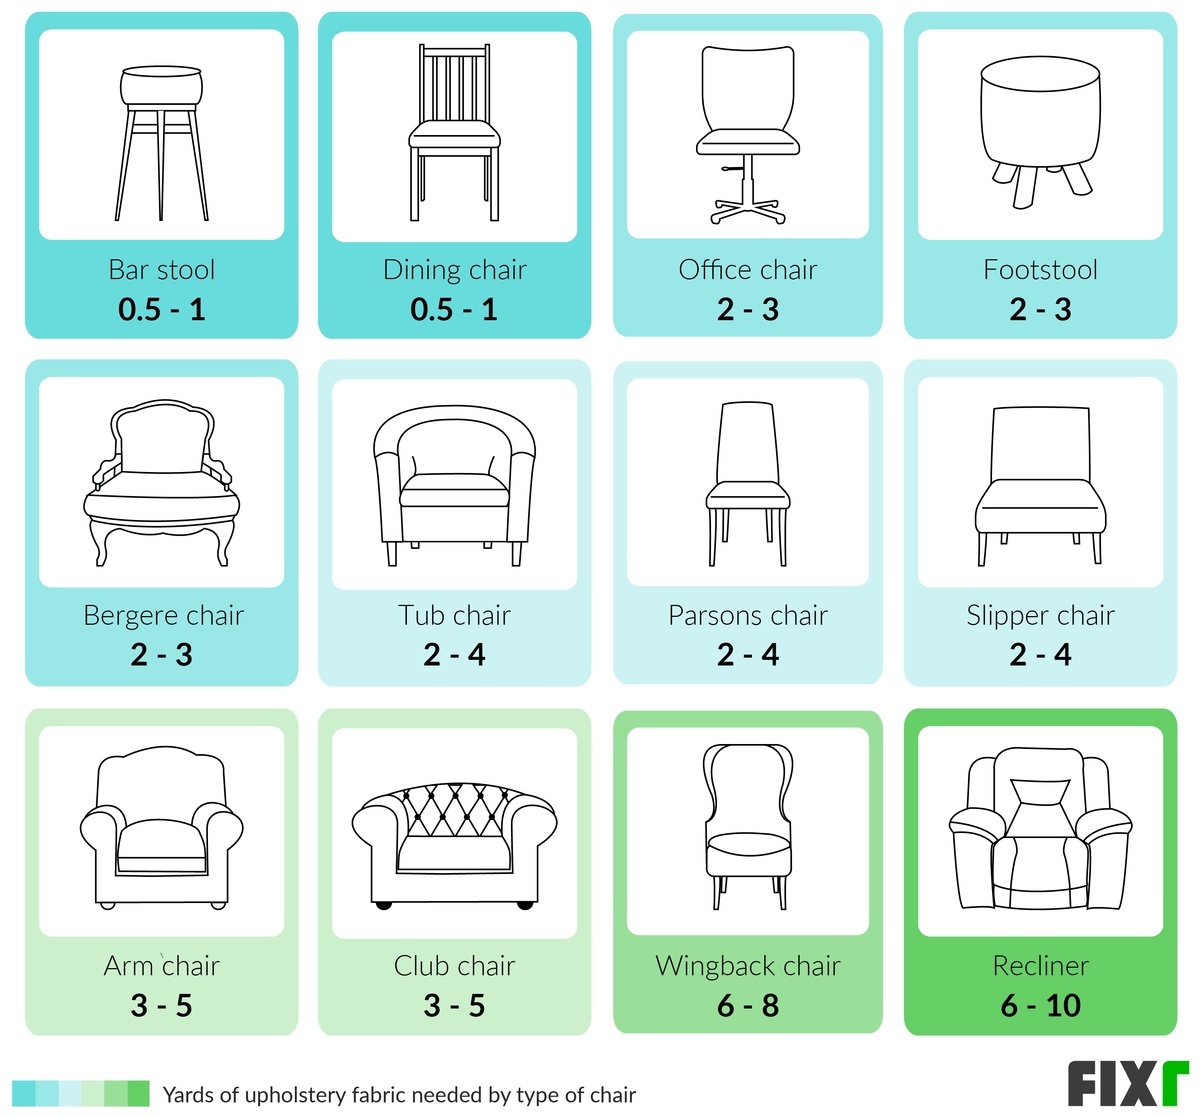 2021 Cost To Reupholster A Chair, How Much Should It Cost To Reupholster A Dining Chair